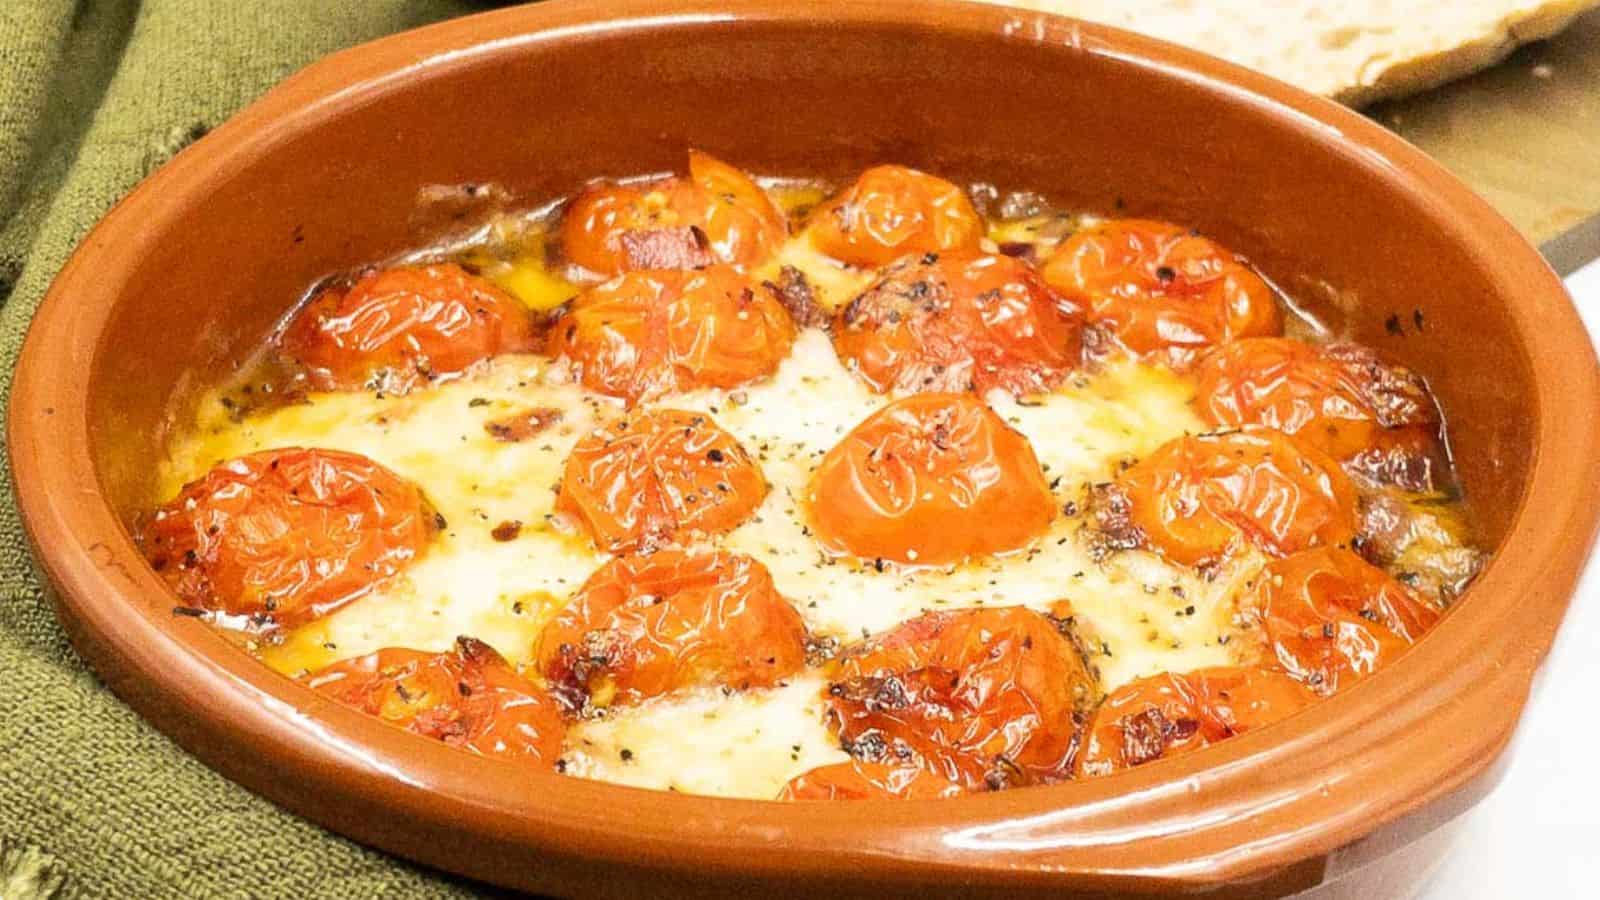 A budget-friendly dish with tomatoes and cheese.